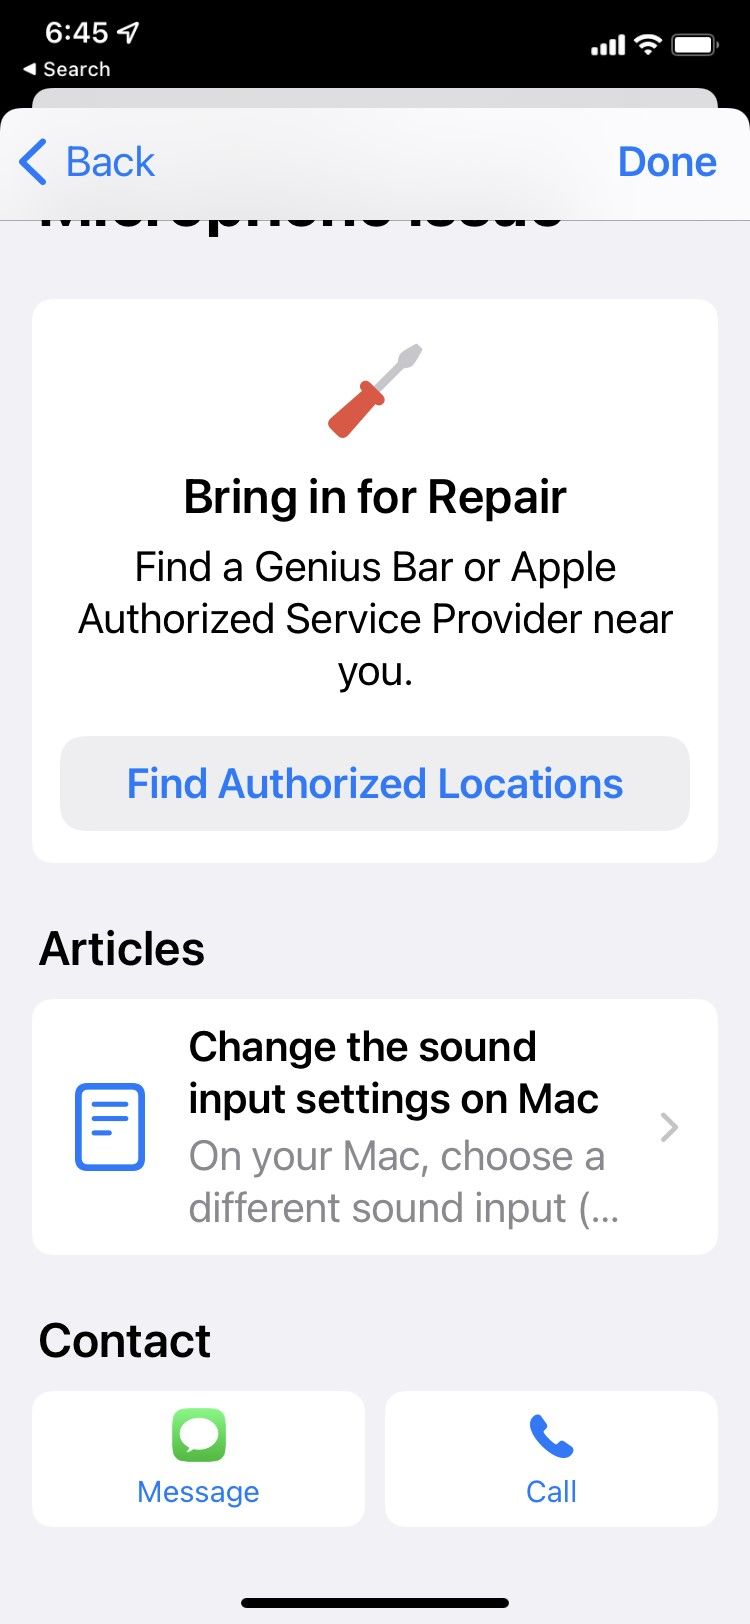 Info on scheduling repair in the Apple Support app